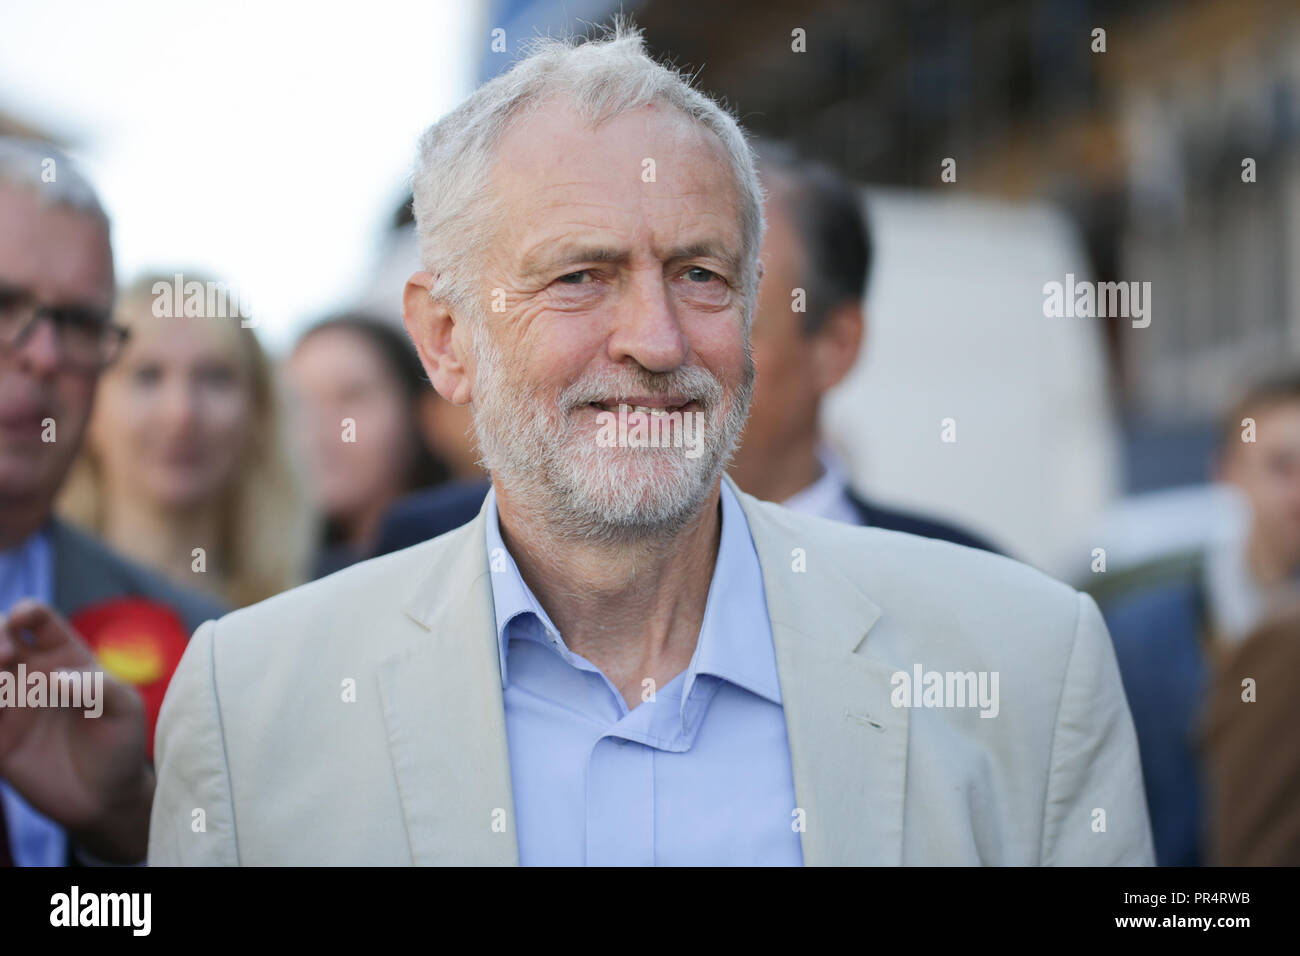 Halesowen, West Midlands, UK. 29th September, 2018. Labour leader Jeremy Corbyn arrives at a rally to gain support for Labour's campaign for the Halesowen and Rowley Regis constituency. Peter Lopeman/Alamy Live News Stock Photo